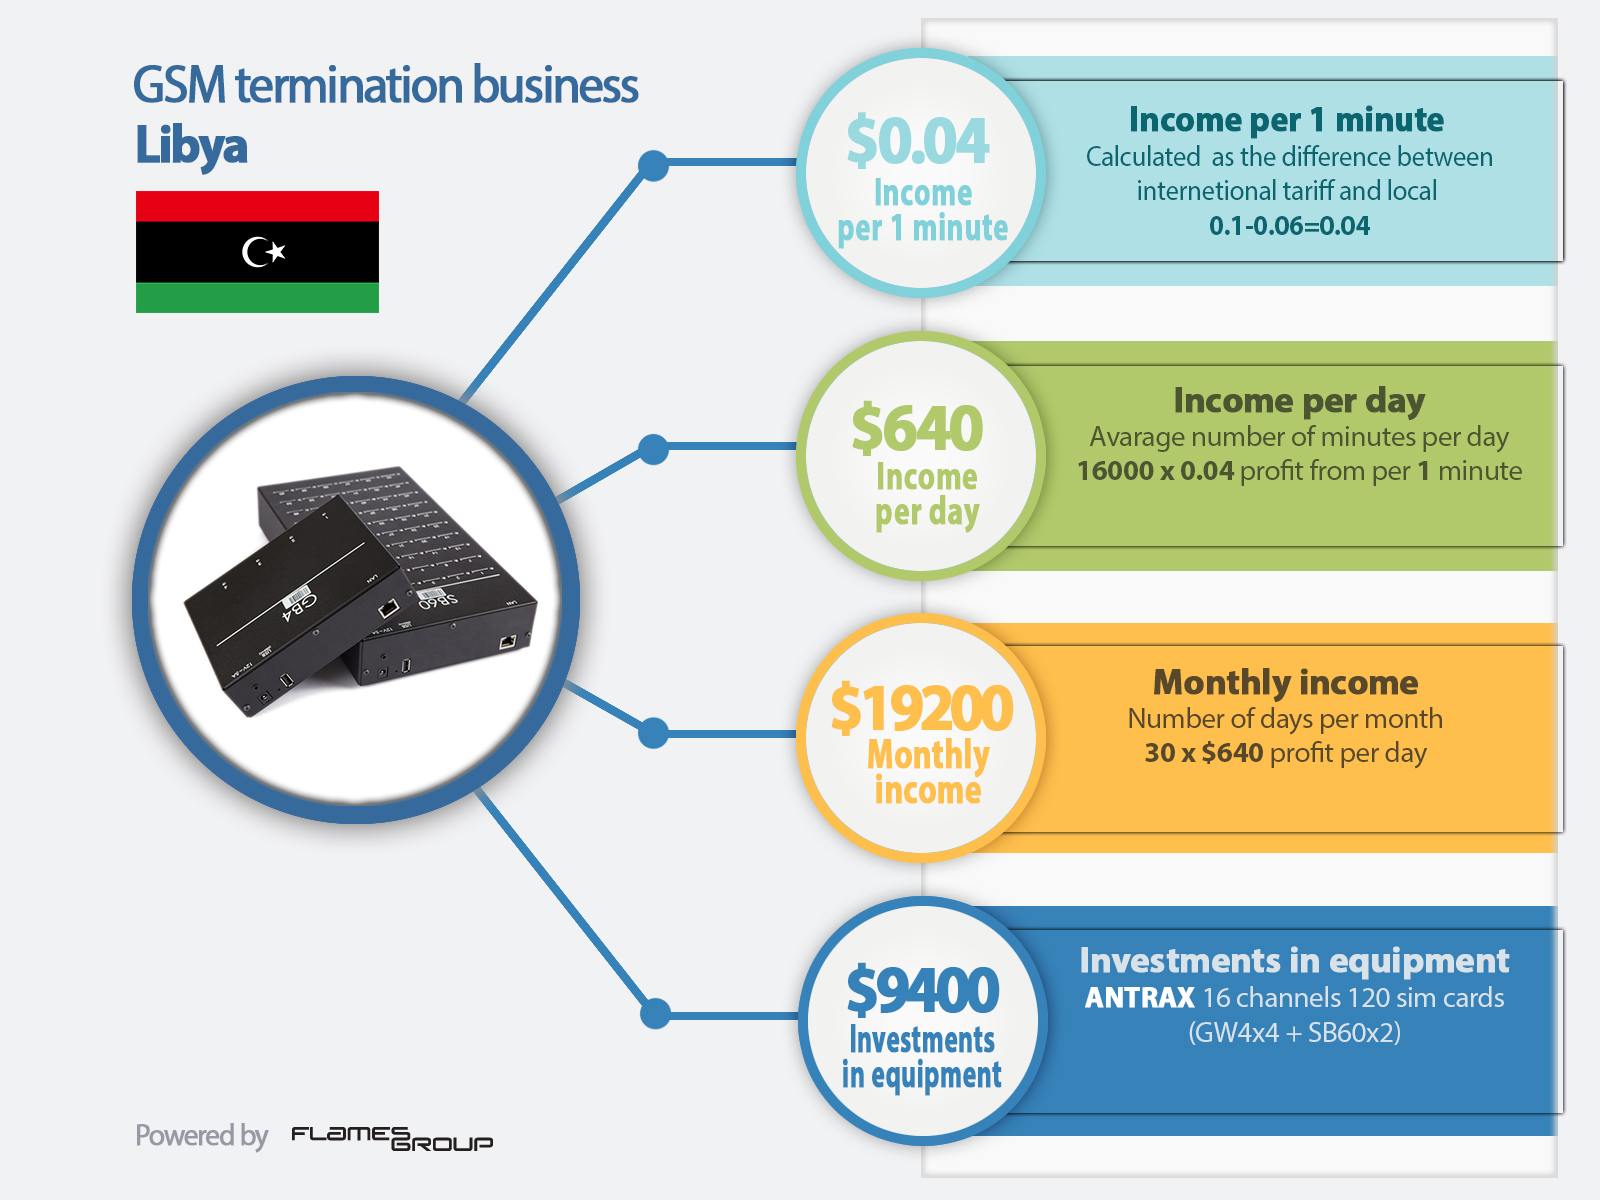 GSM termination in Libya - Infographic ANTRAX